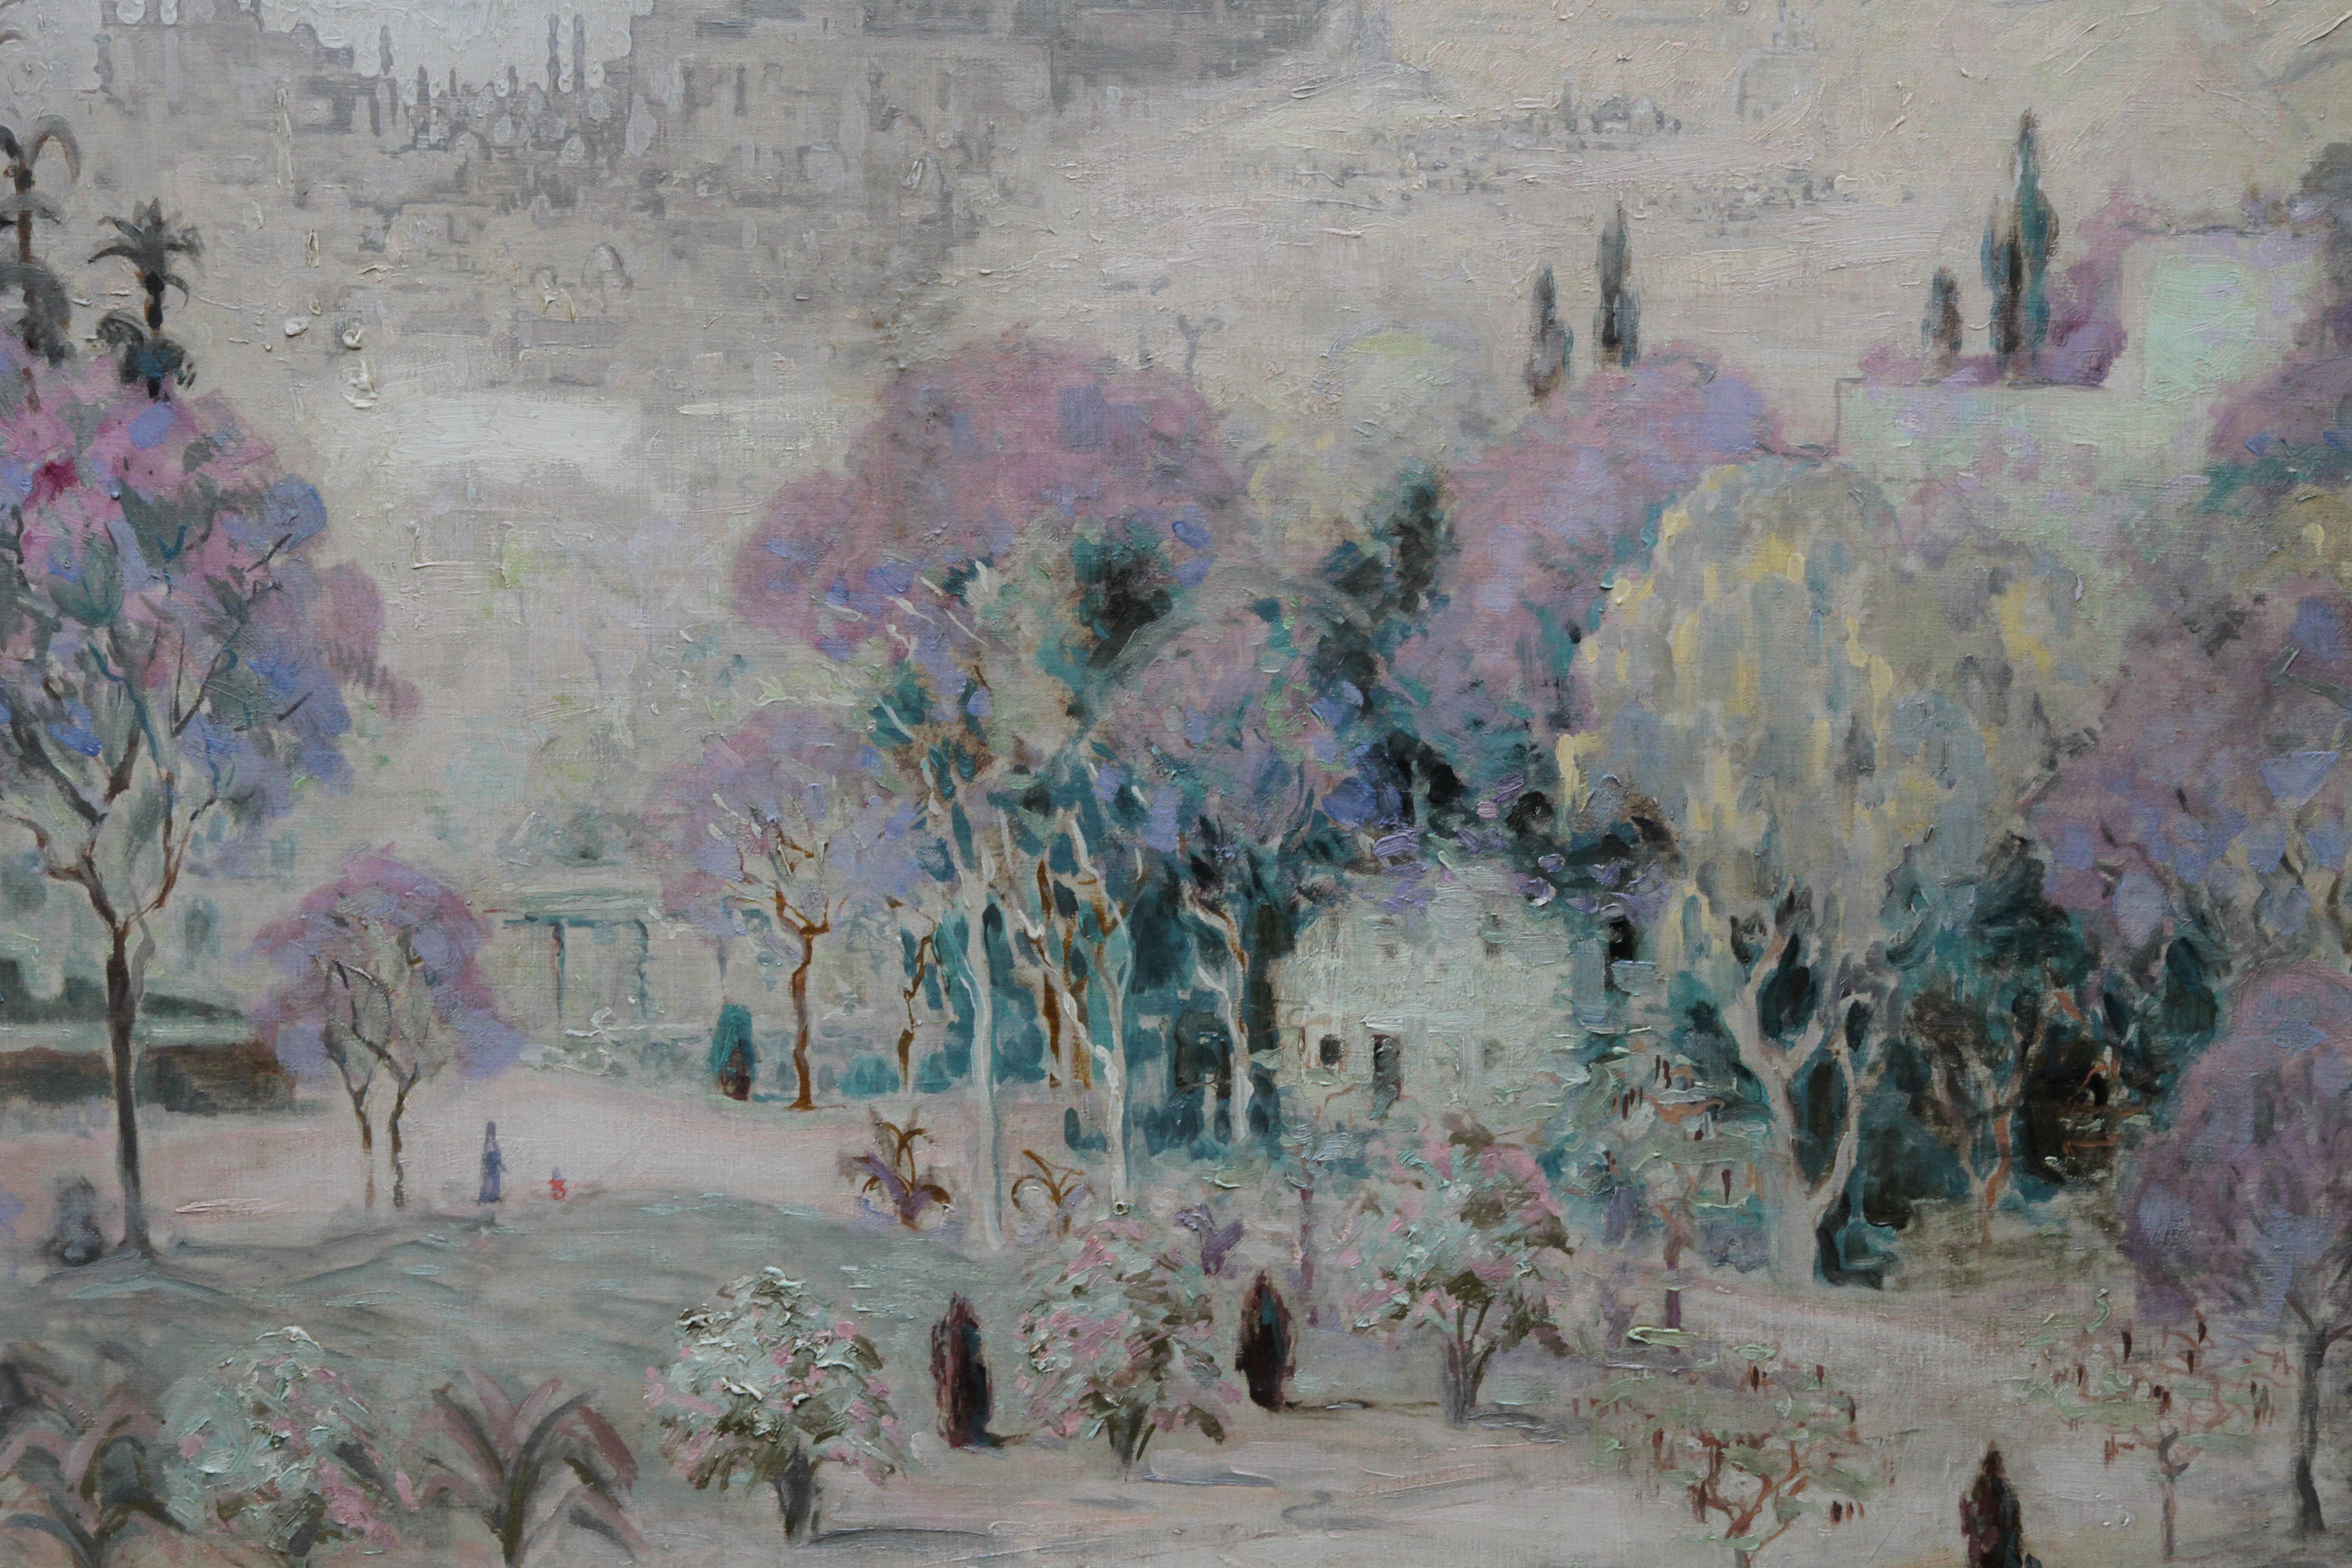 This striking oil on canvas painting is by Irish artist Gladys Nolan and was painted circa 1930. This Post Impressionist view is of Istanbul, Turkey with the spires of the iconic Blue Mosque and other buildings in the background. In the foreground